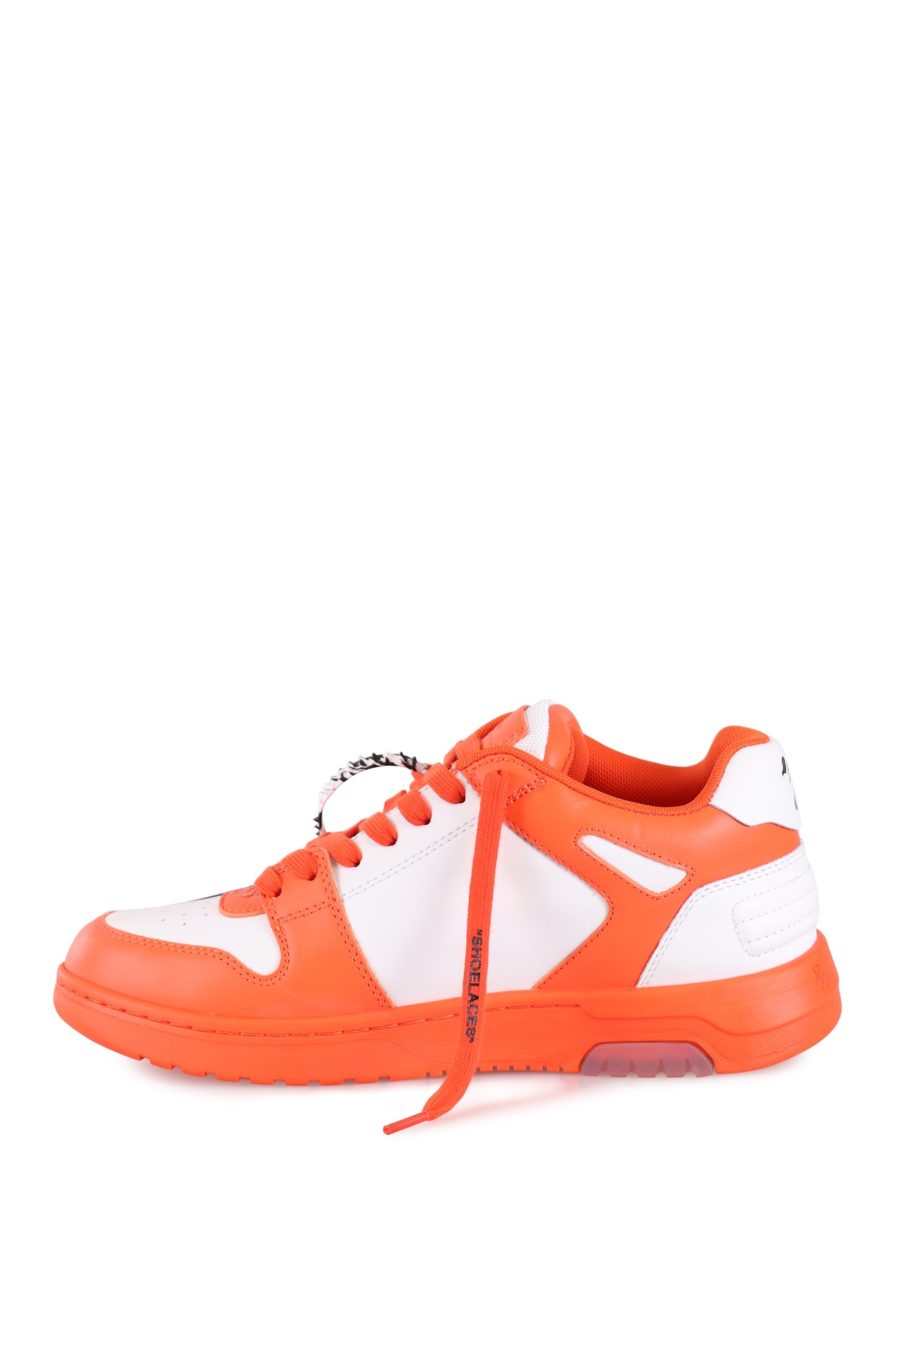 Trainers Off-White "out of office" white with orange - ee09896a6e210ccaae8727d35211009c46a4ea4d